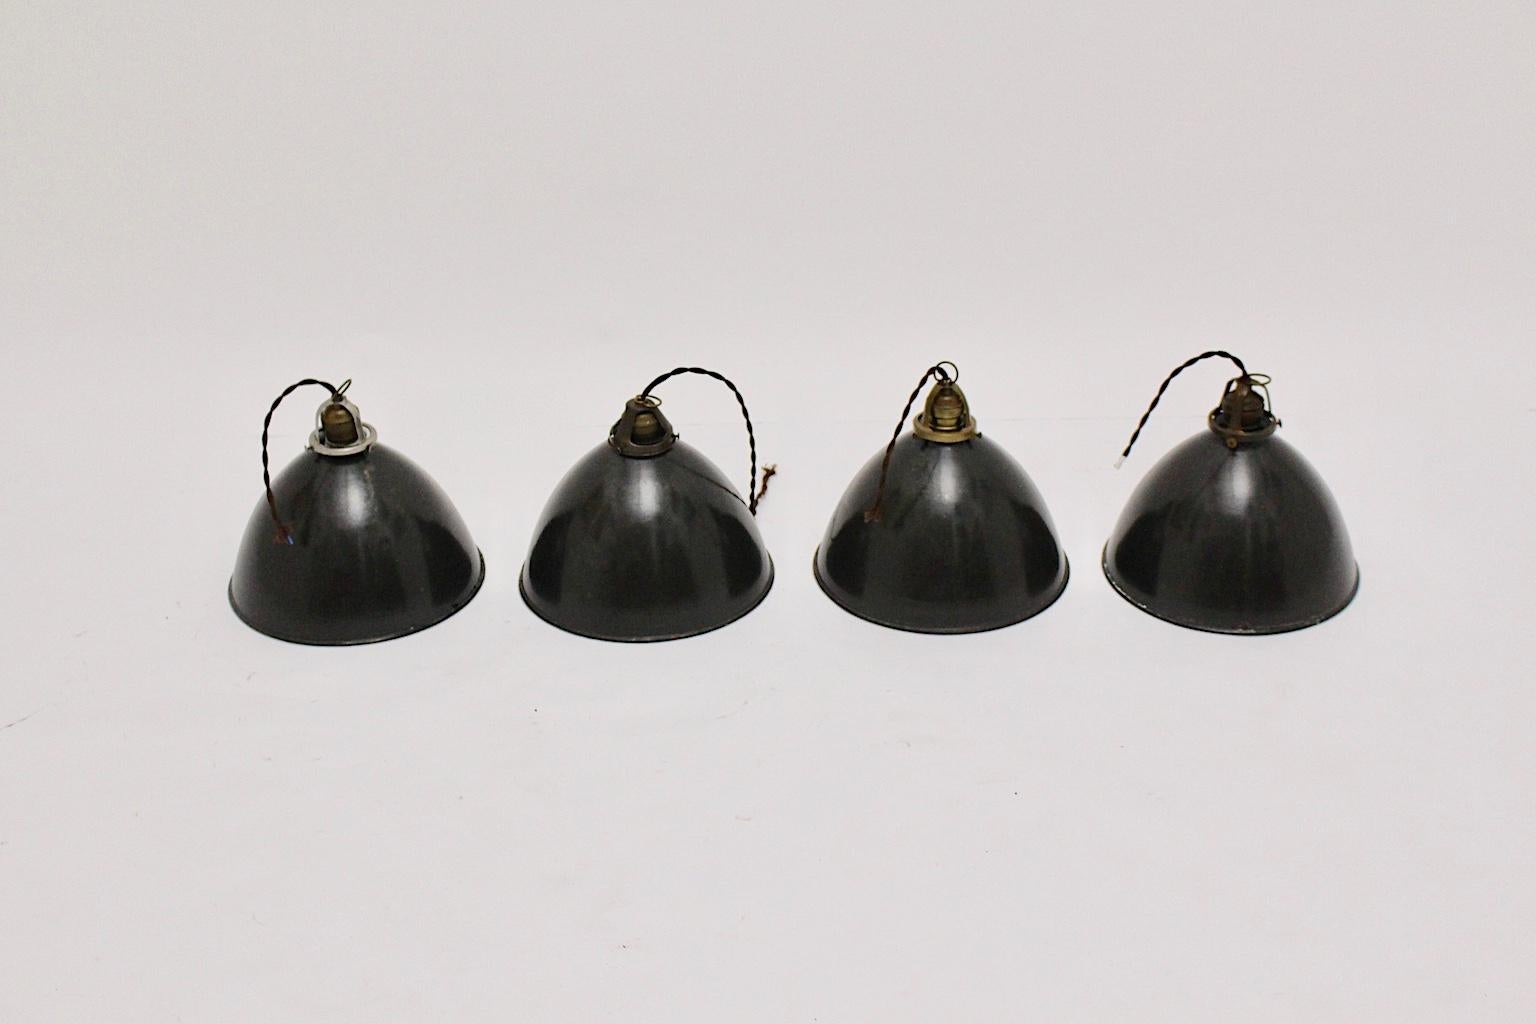 A set of 4 black and white enameled Bauhaus Hanging Lamps, which were designed and executed 1920s in Europe, Germany. 
The simple and clean Industrial Design features make it easy to go with each design style.

The hanging lamps were made out of